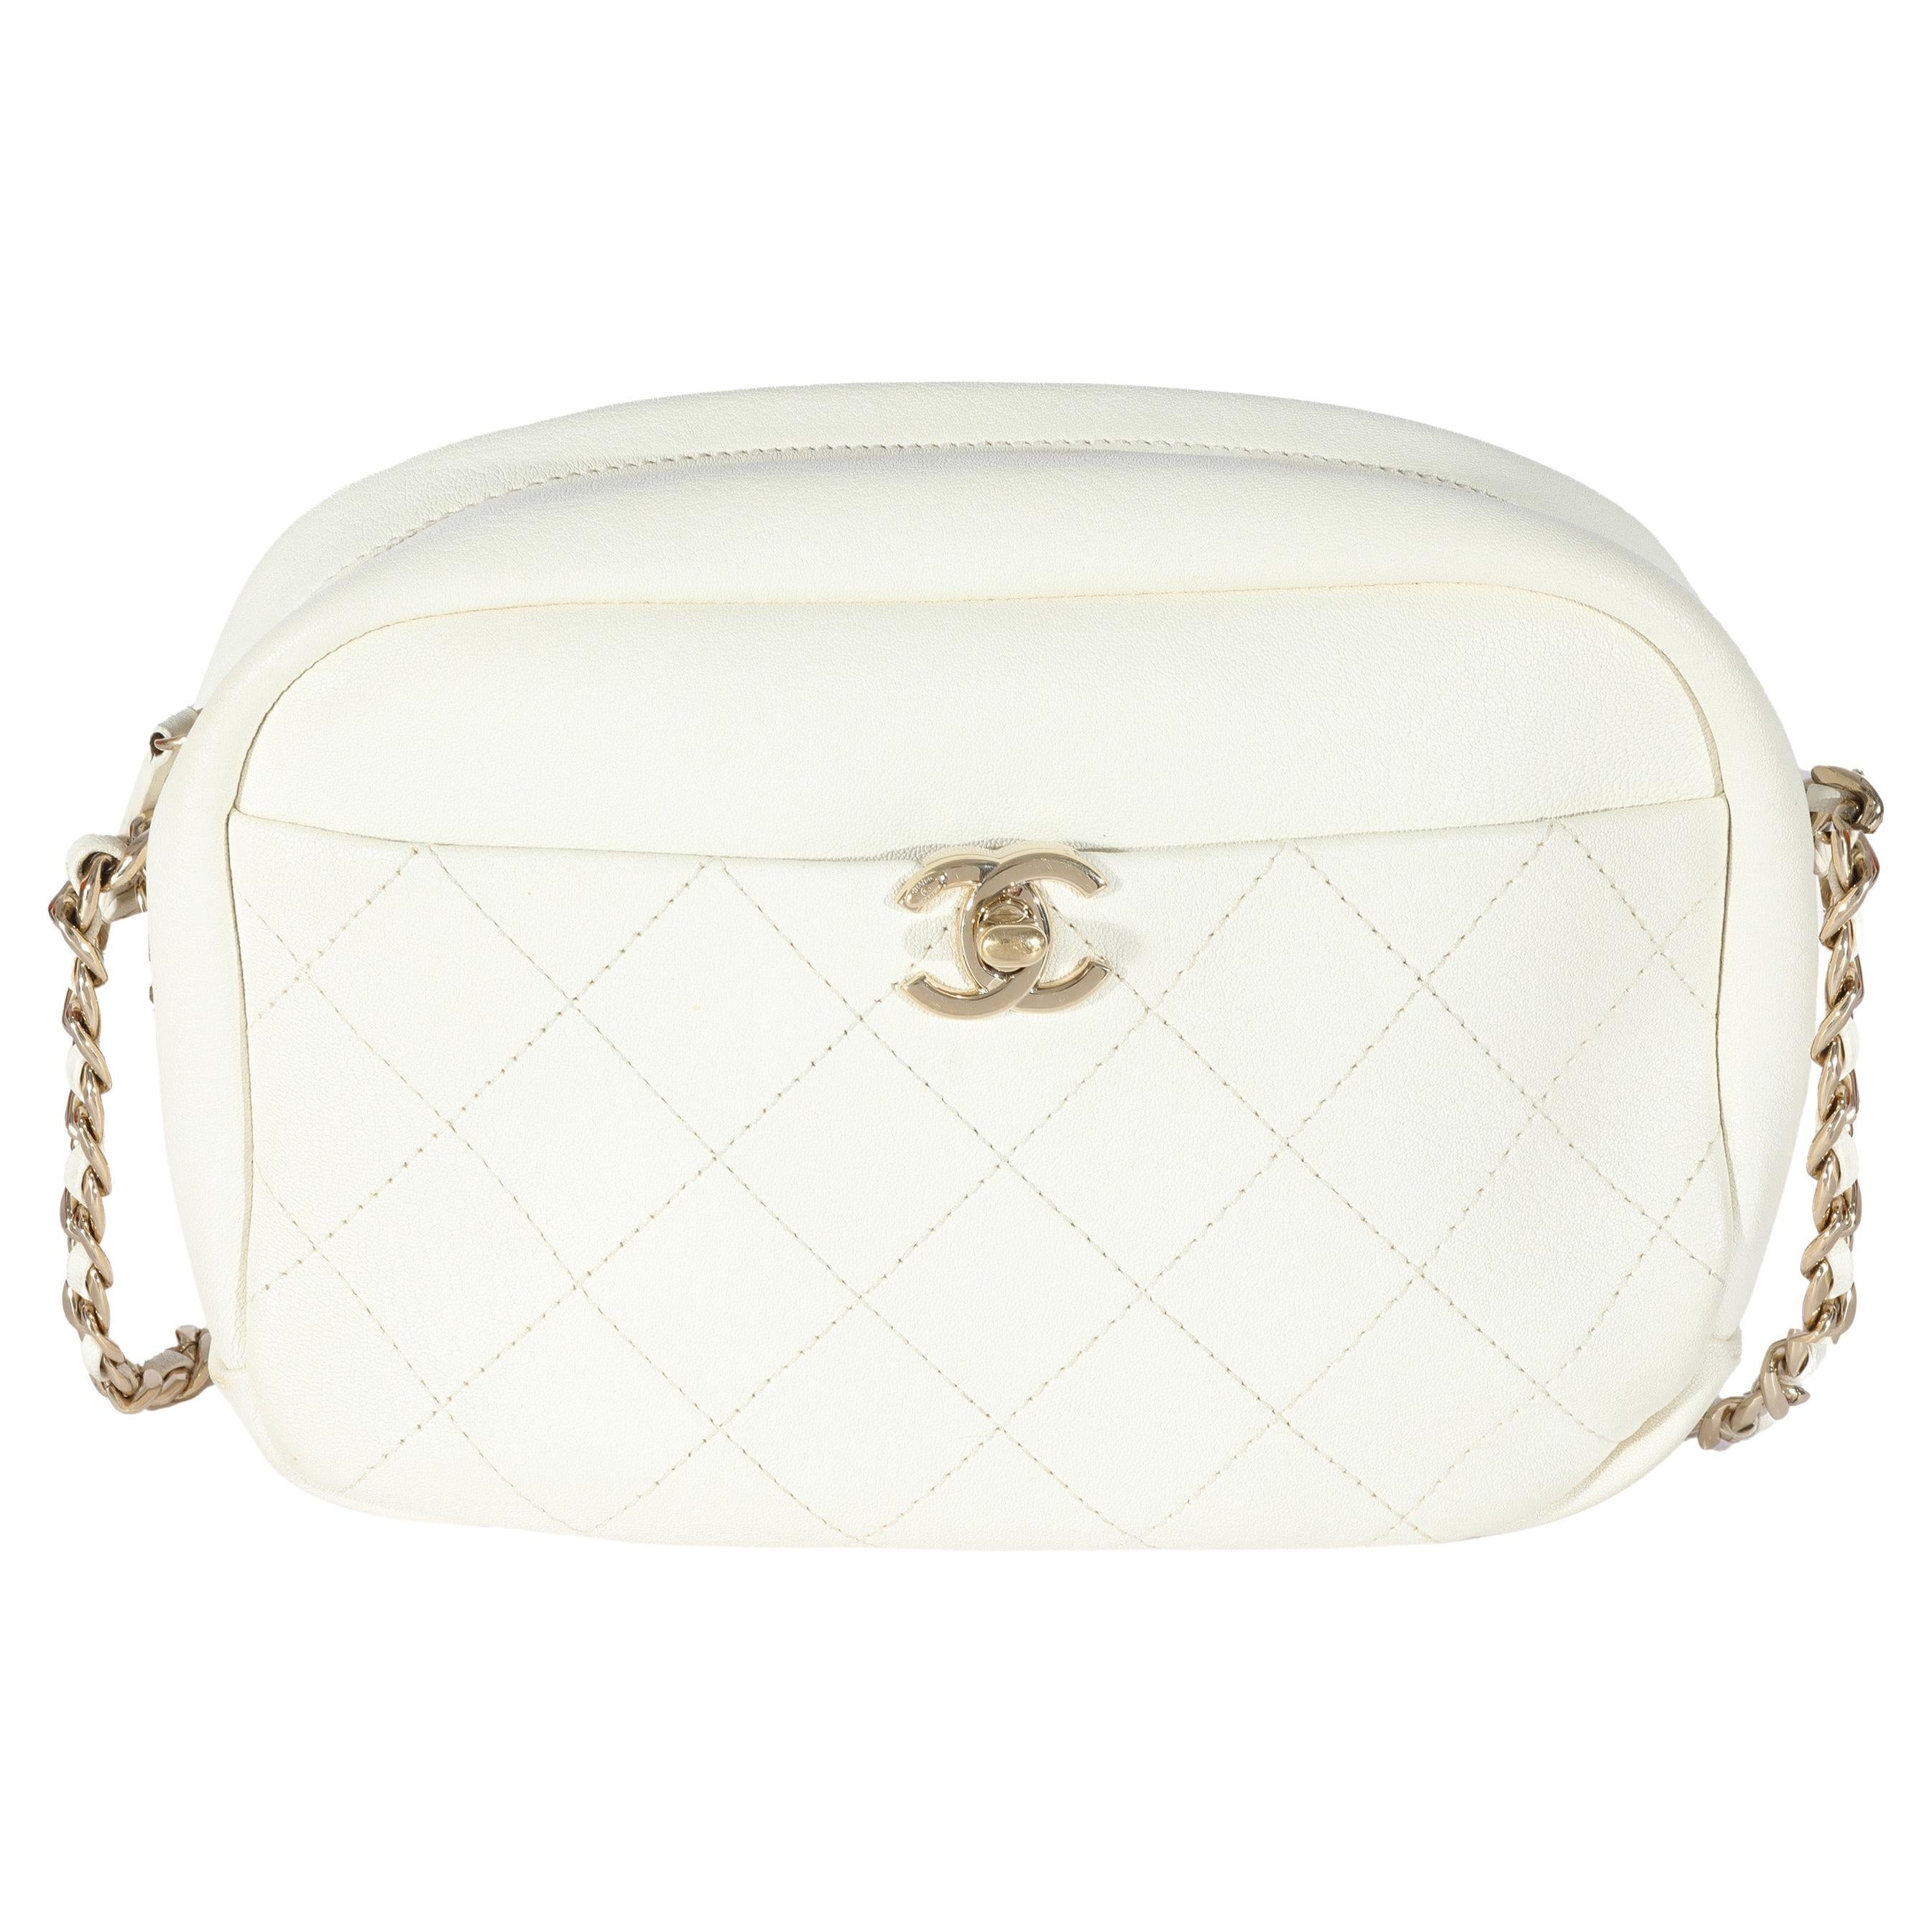 Chanel White Leather Casual Trip Camera Bag For Sale